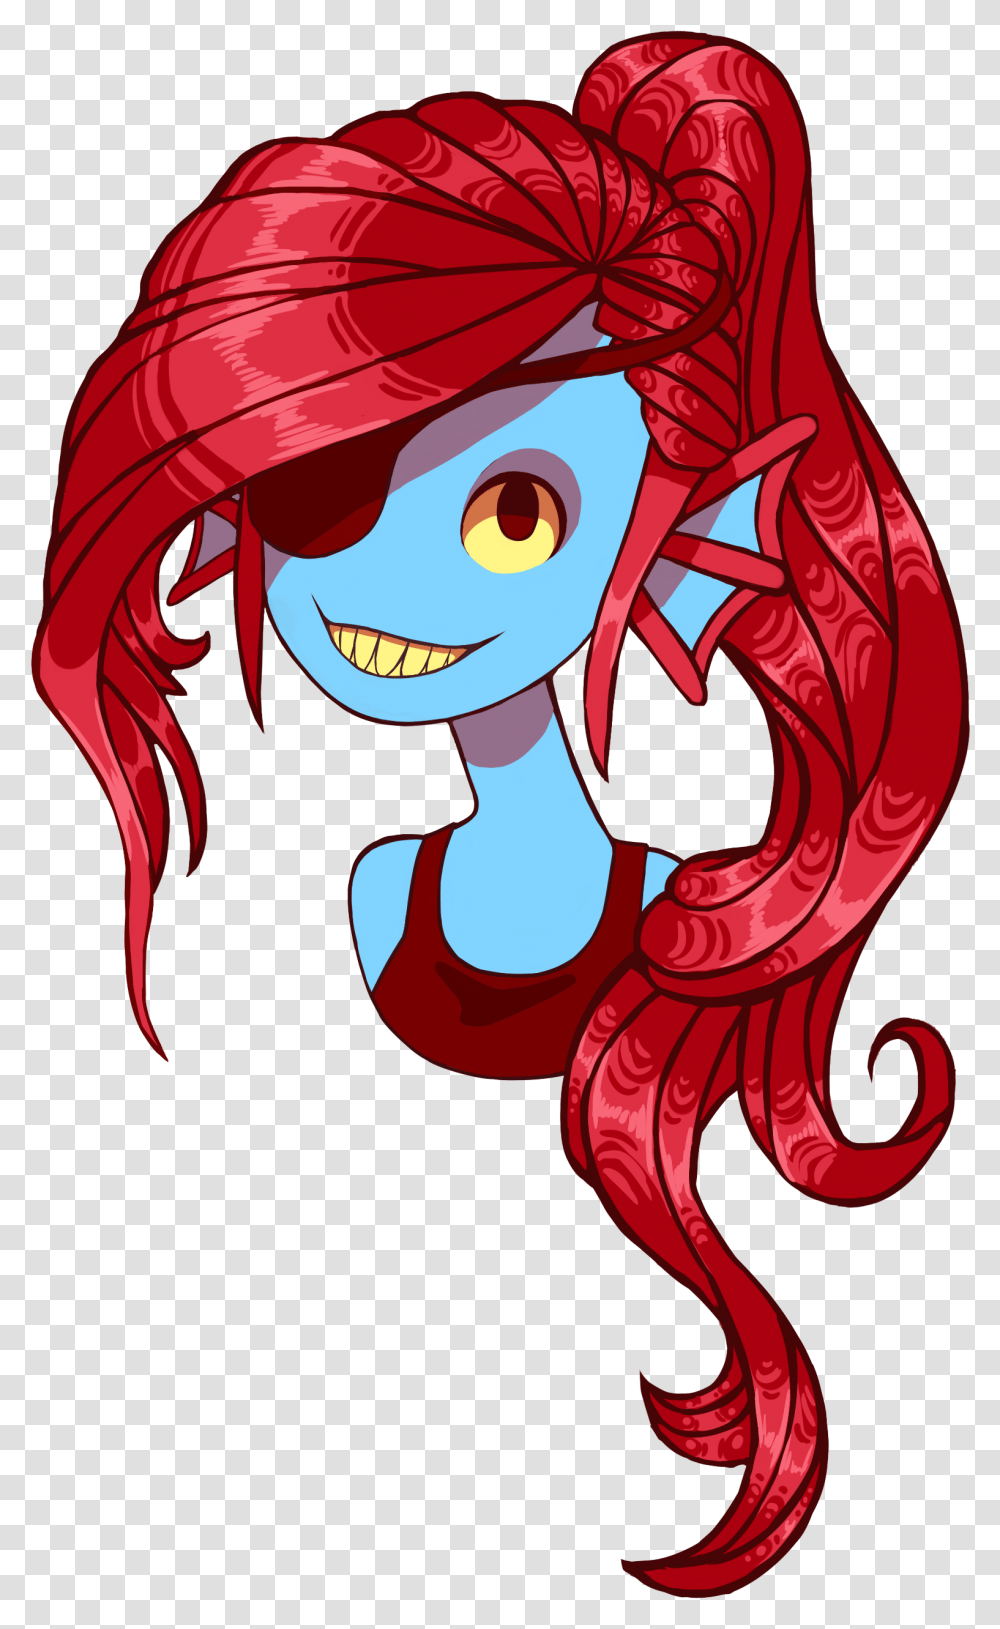 Undyne The Babe From Undertale Download Cartoon, Angry Birds Transparent Png